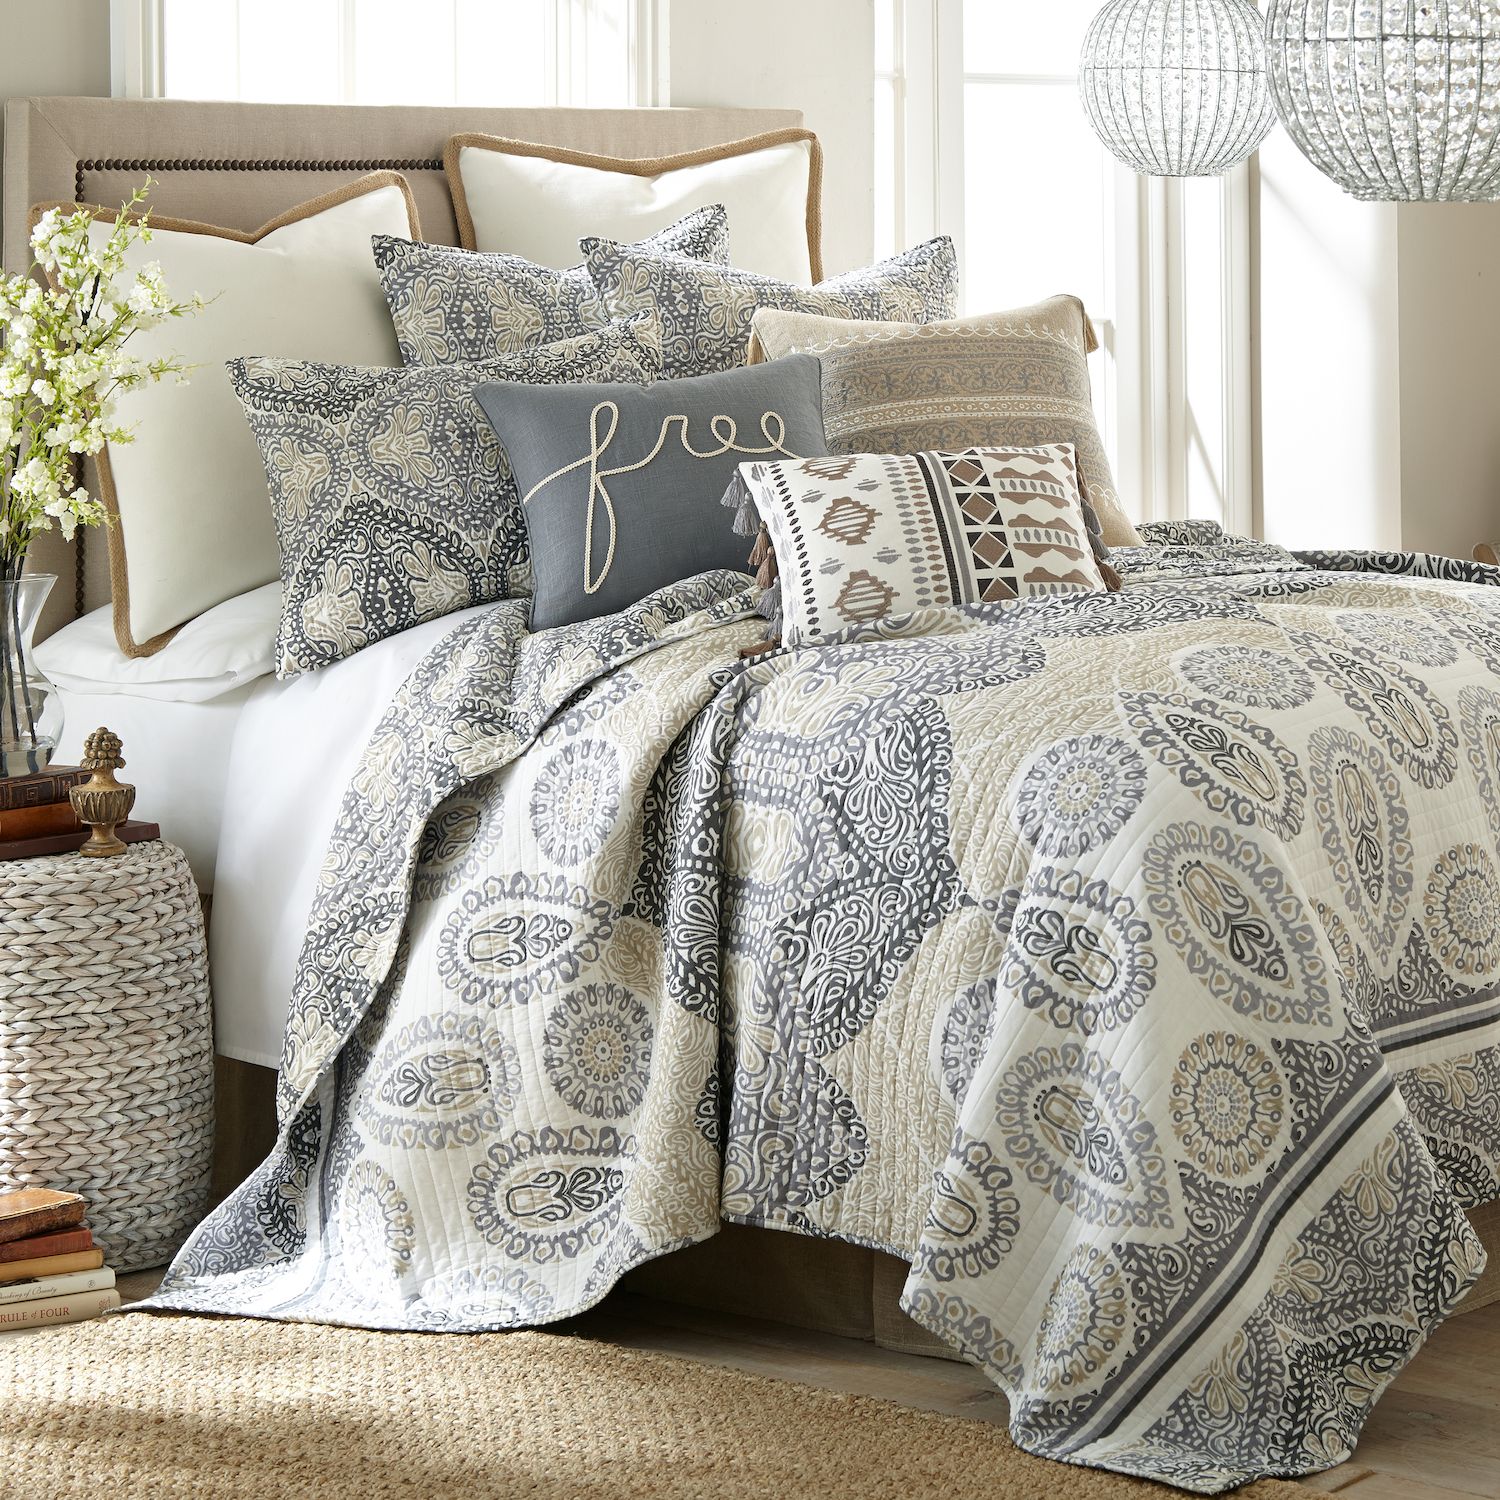 Image for Levtex Home Reno Quilt Set at Kohl's.